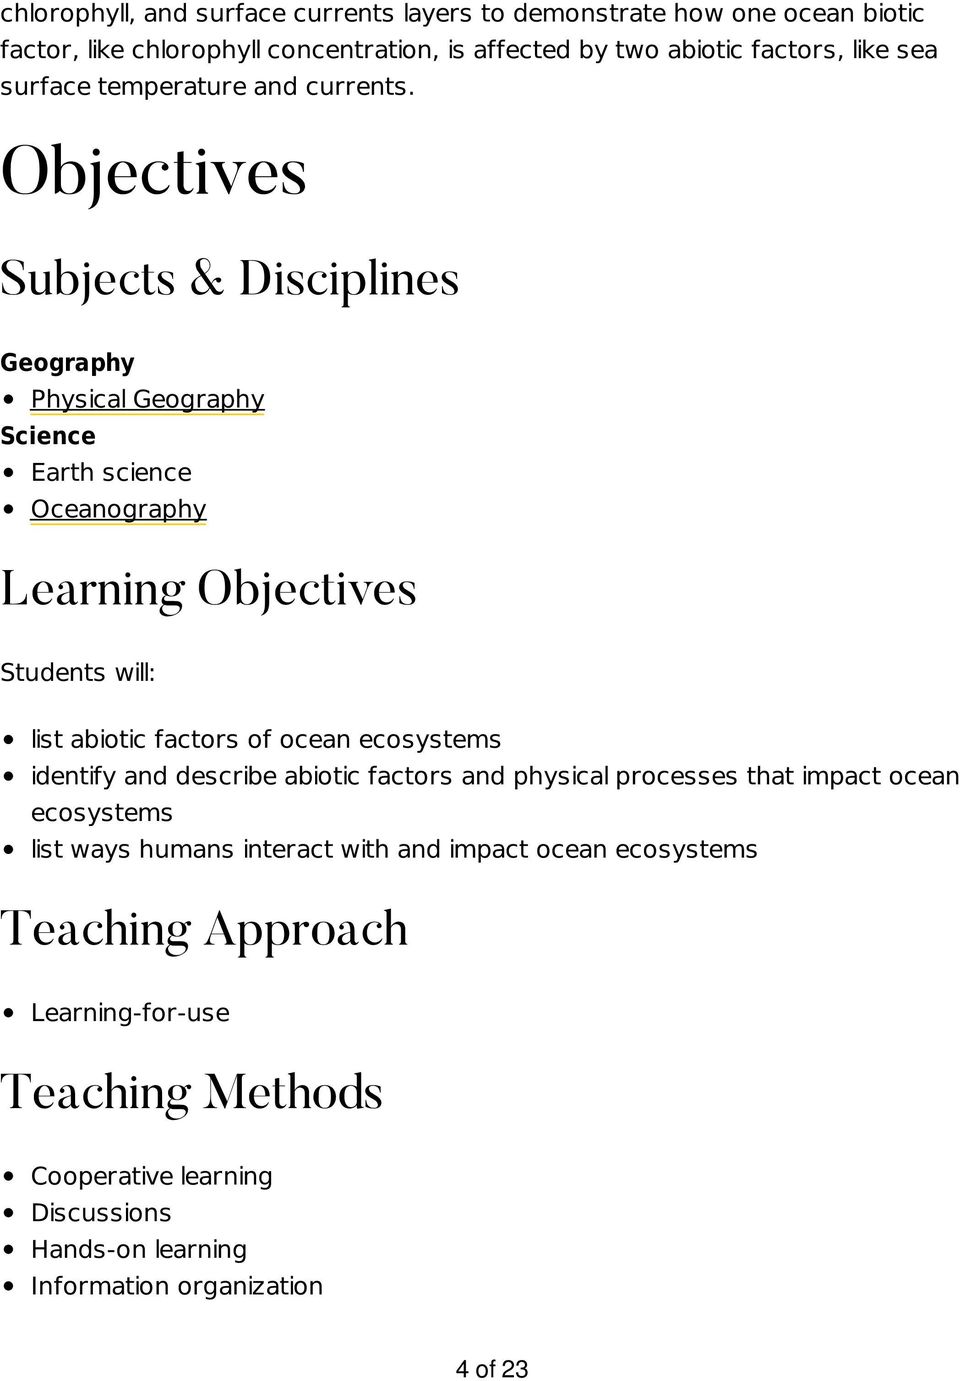 Objectives Subjects & Disciplines Geography Physical Geography Science Earth science Oceanography Learning Objectives Students will: list abiotic factors of ocean